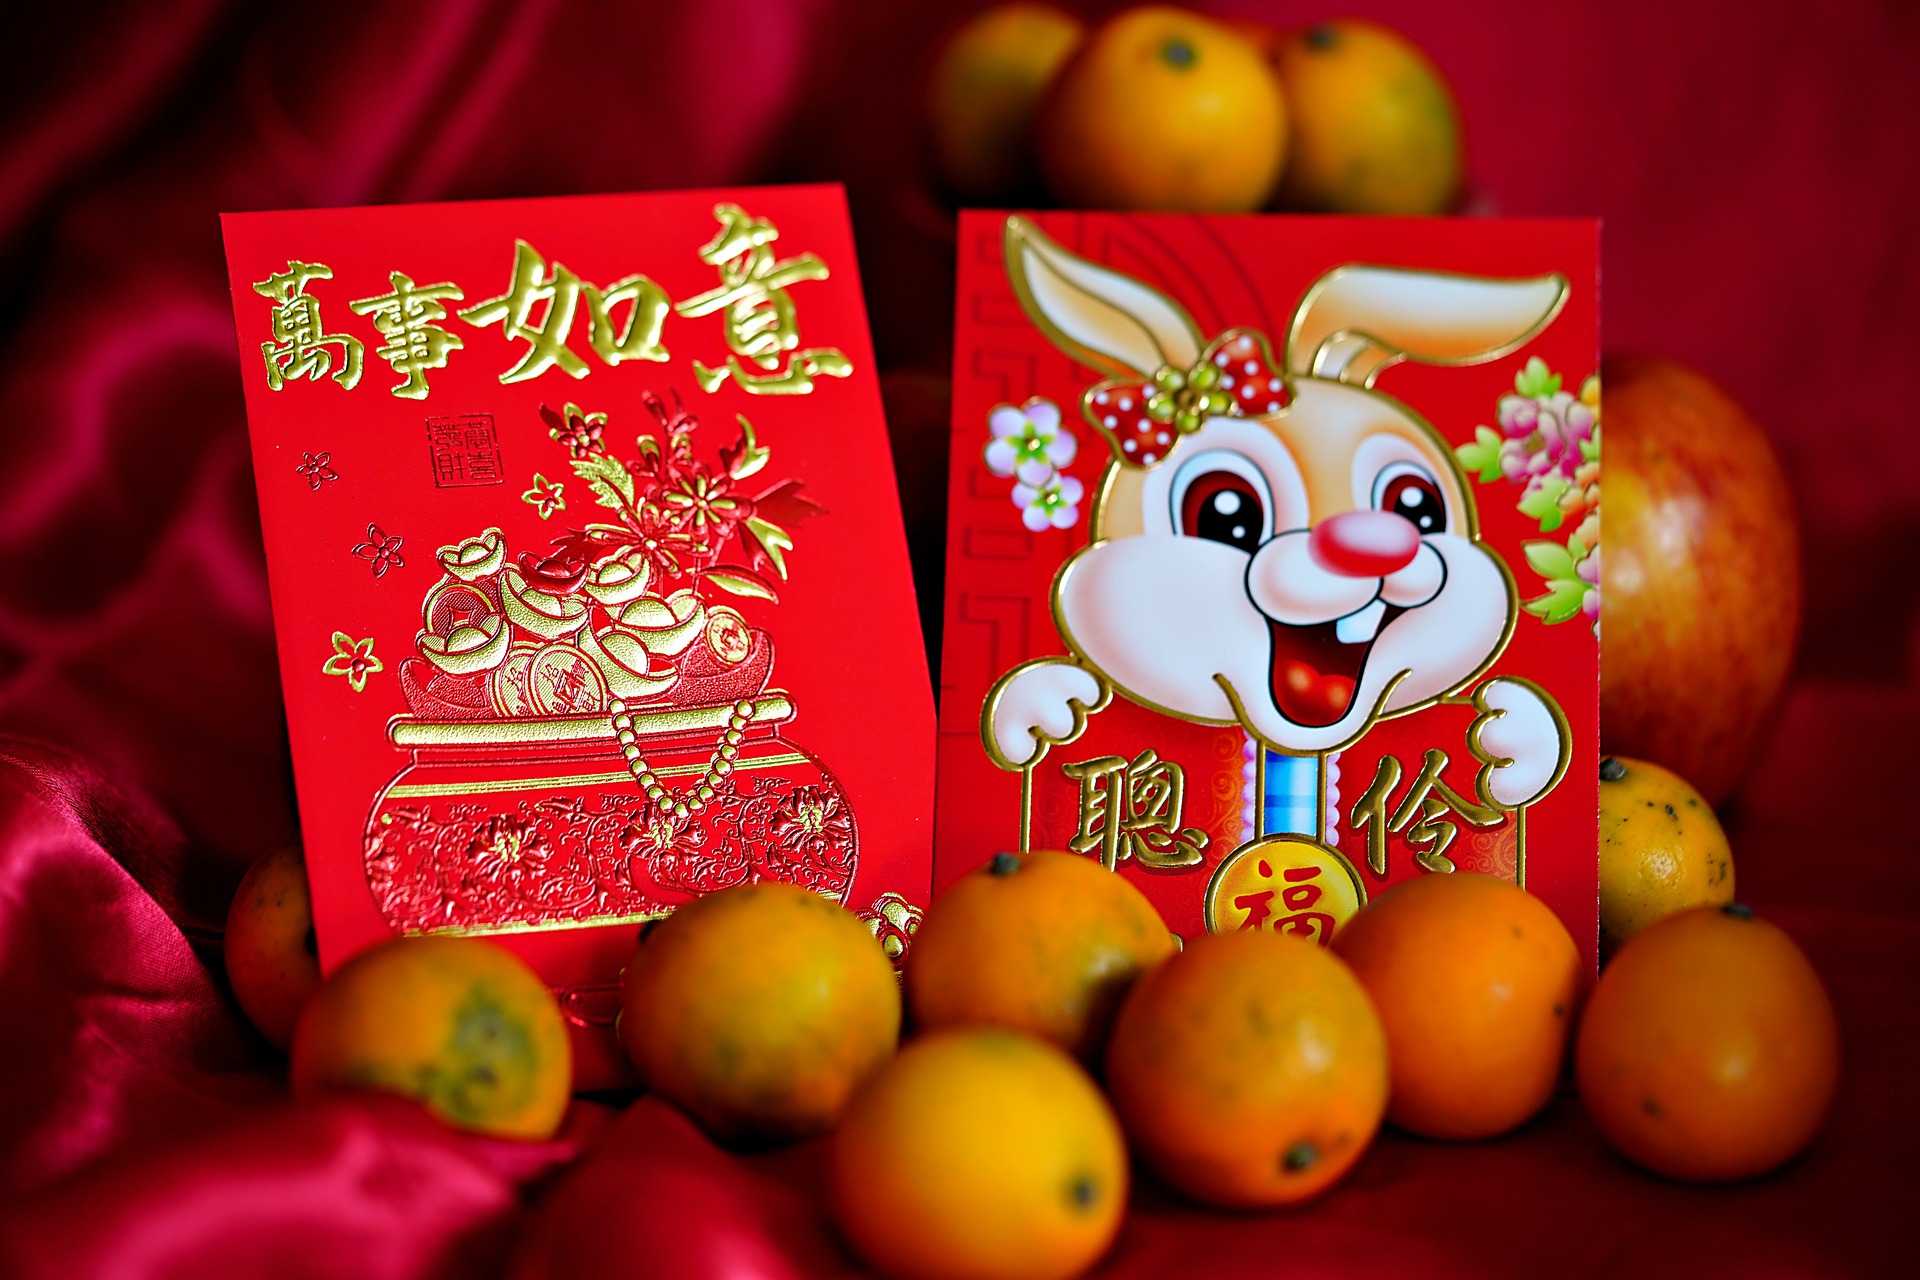 year of the rabbit red envelope and oranges by hartono subagio on pixabay